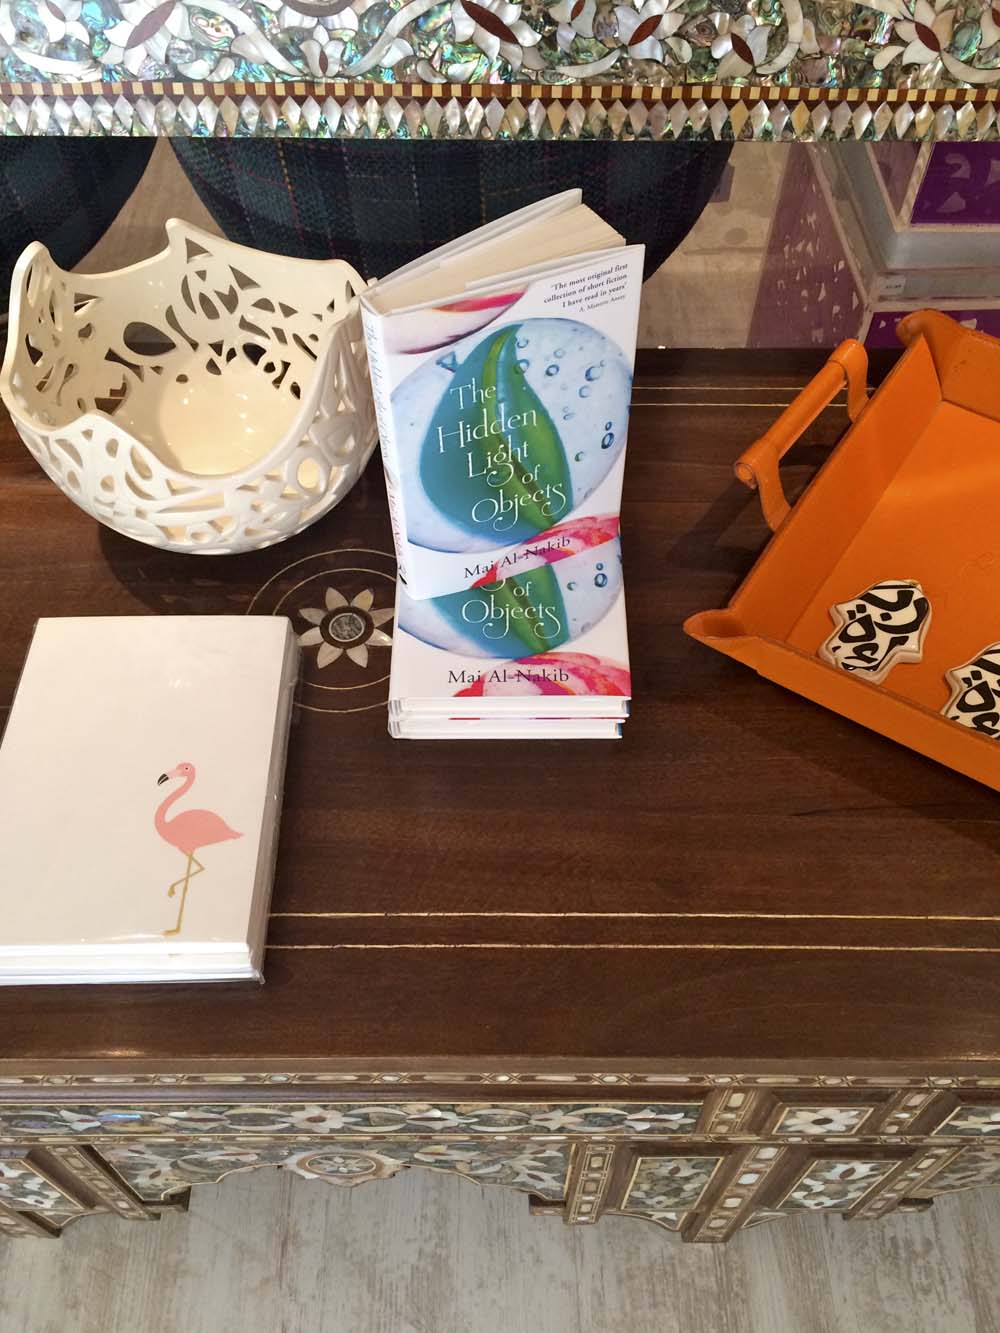 my dear friend mai al-nakib's book 'the hidden light of objects'. also an intricate ceramic piece and 'hands of fatima' by jordanian sculptor katia al-tal. and i love choux a la creme's quirky cards and notebooks, like the flamingo one here